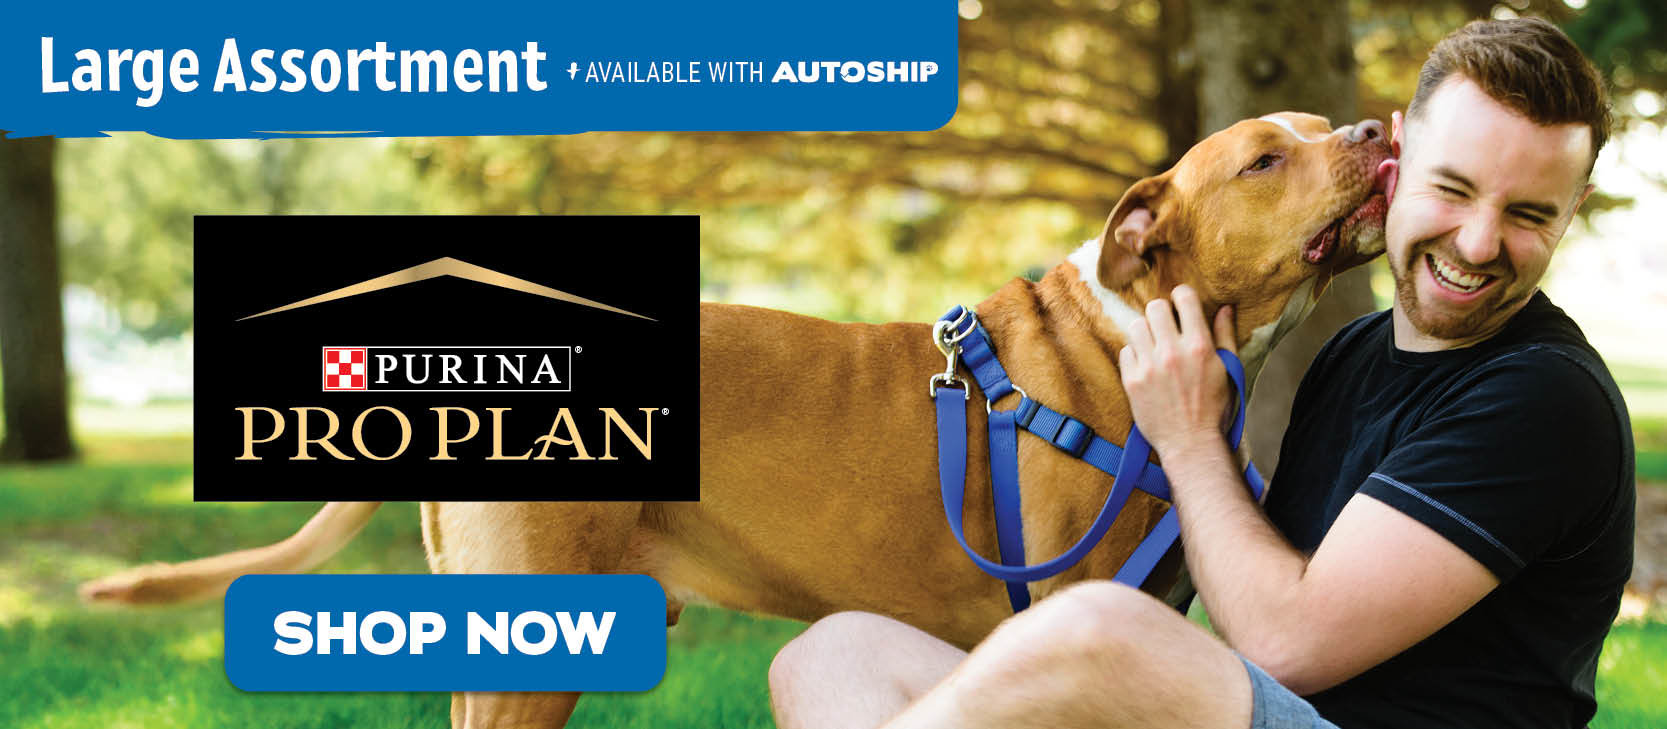 Pro Plan - A large assortment available with autoship